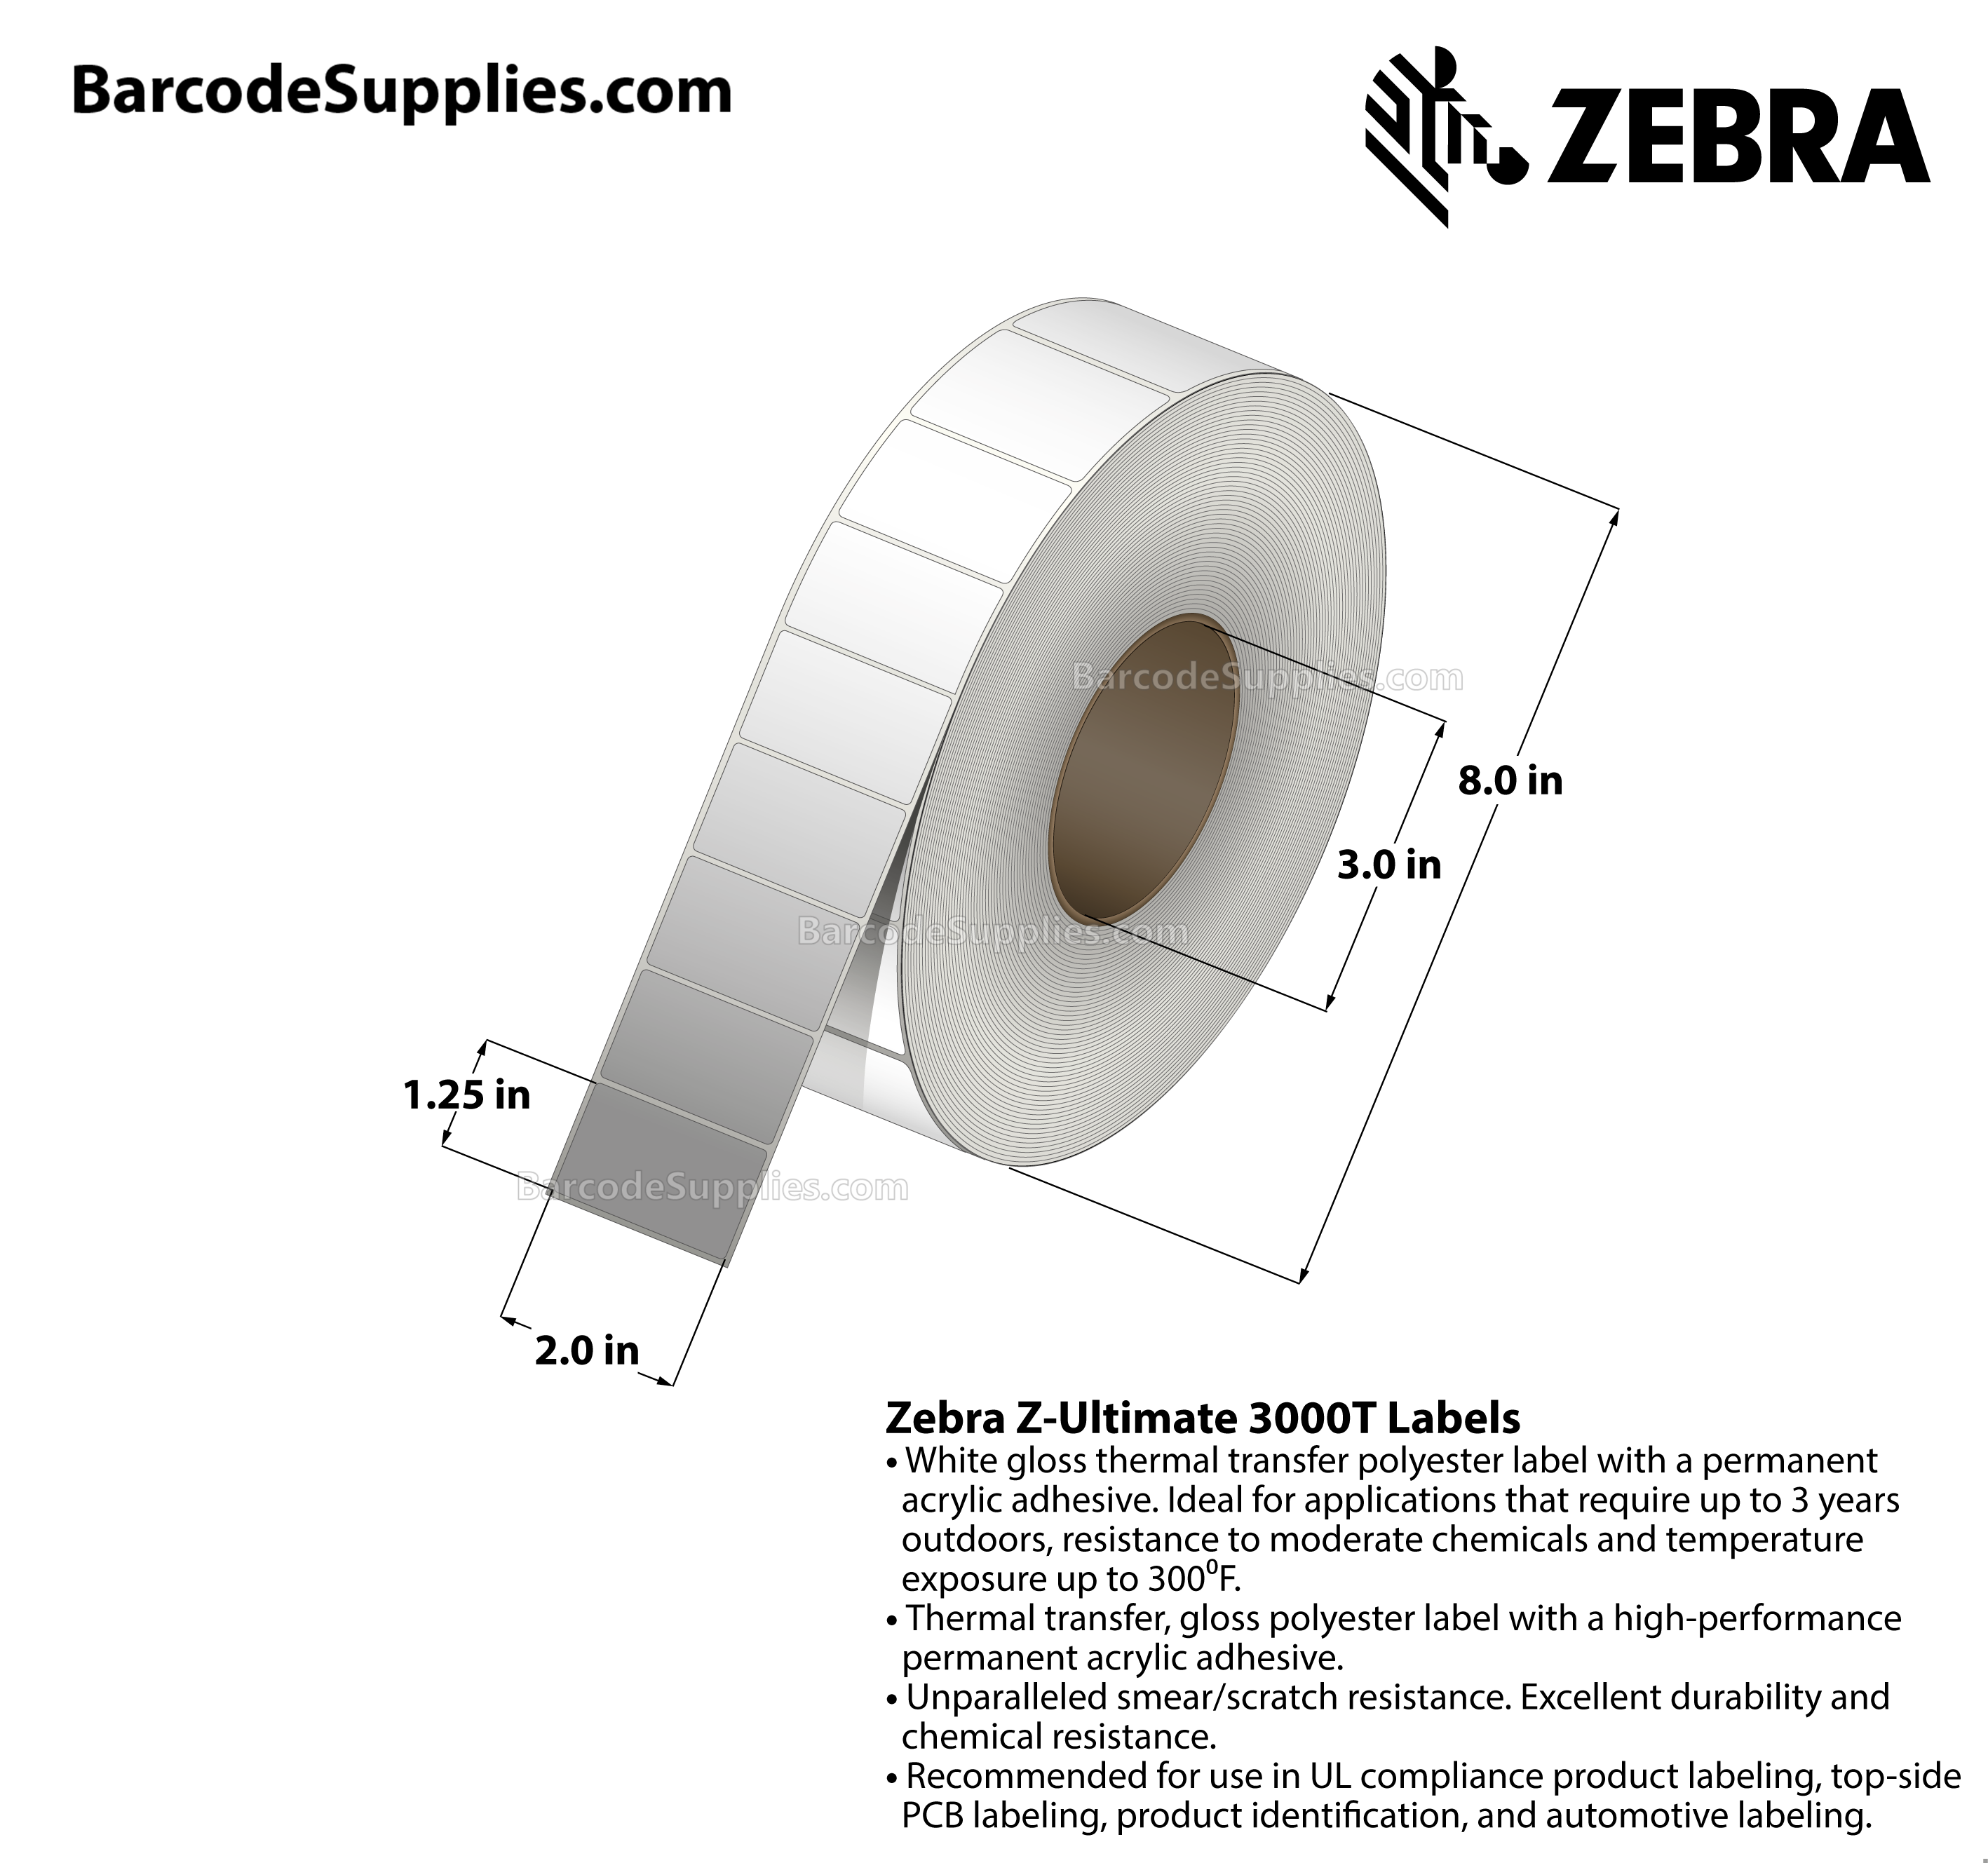 2 x 1.25 Thermal Transfer White Z-Ultimate 3000T Labels With Permanent Adhesive - Not Perforated - 4270 Labels Per Roll - Carton Of 4 Rolls - 17080 Labels Total - MPN: 10011698